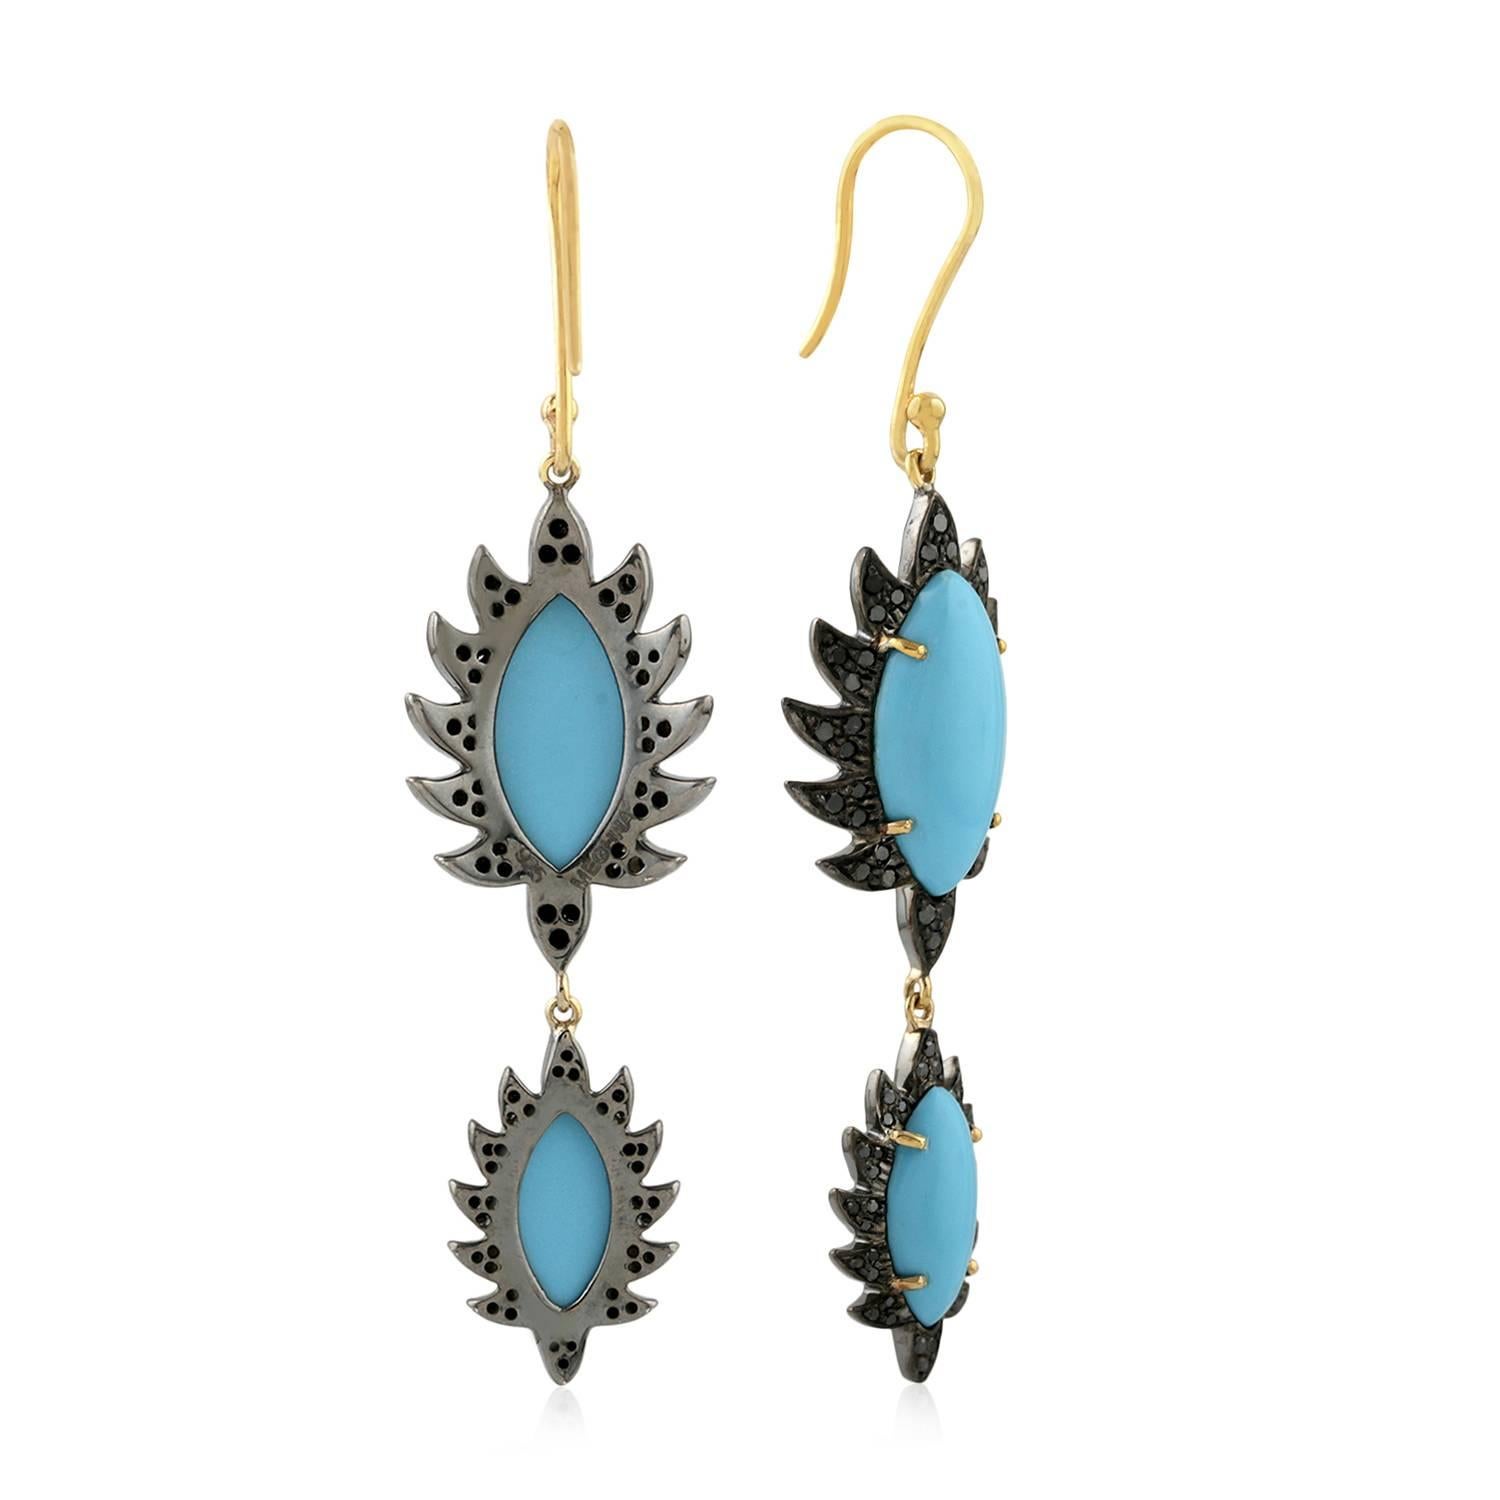 These beautiful drop earrings are cast in 18K gold and sterling silver. It is hand set in 7.54 carat turquoise and .71 carat of black diamonds, french hook closures. Framed in signature 